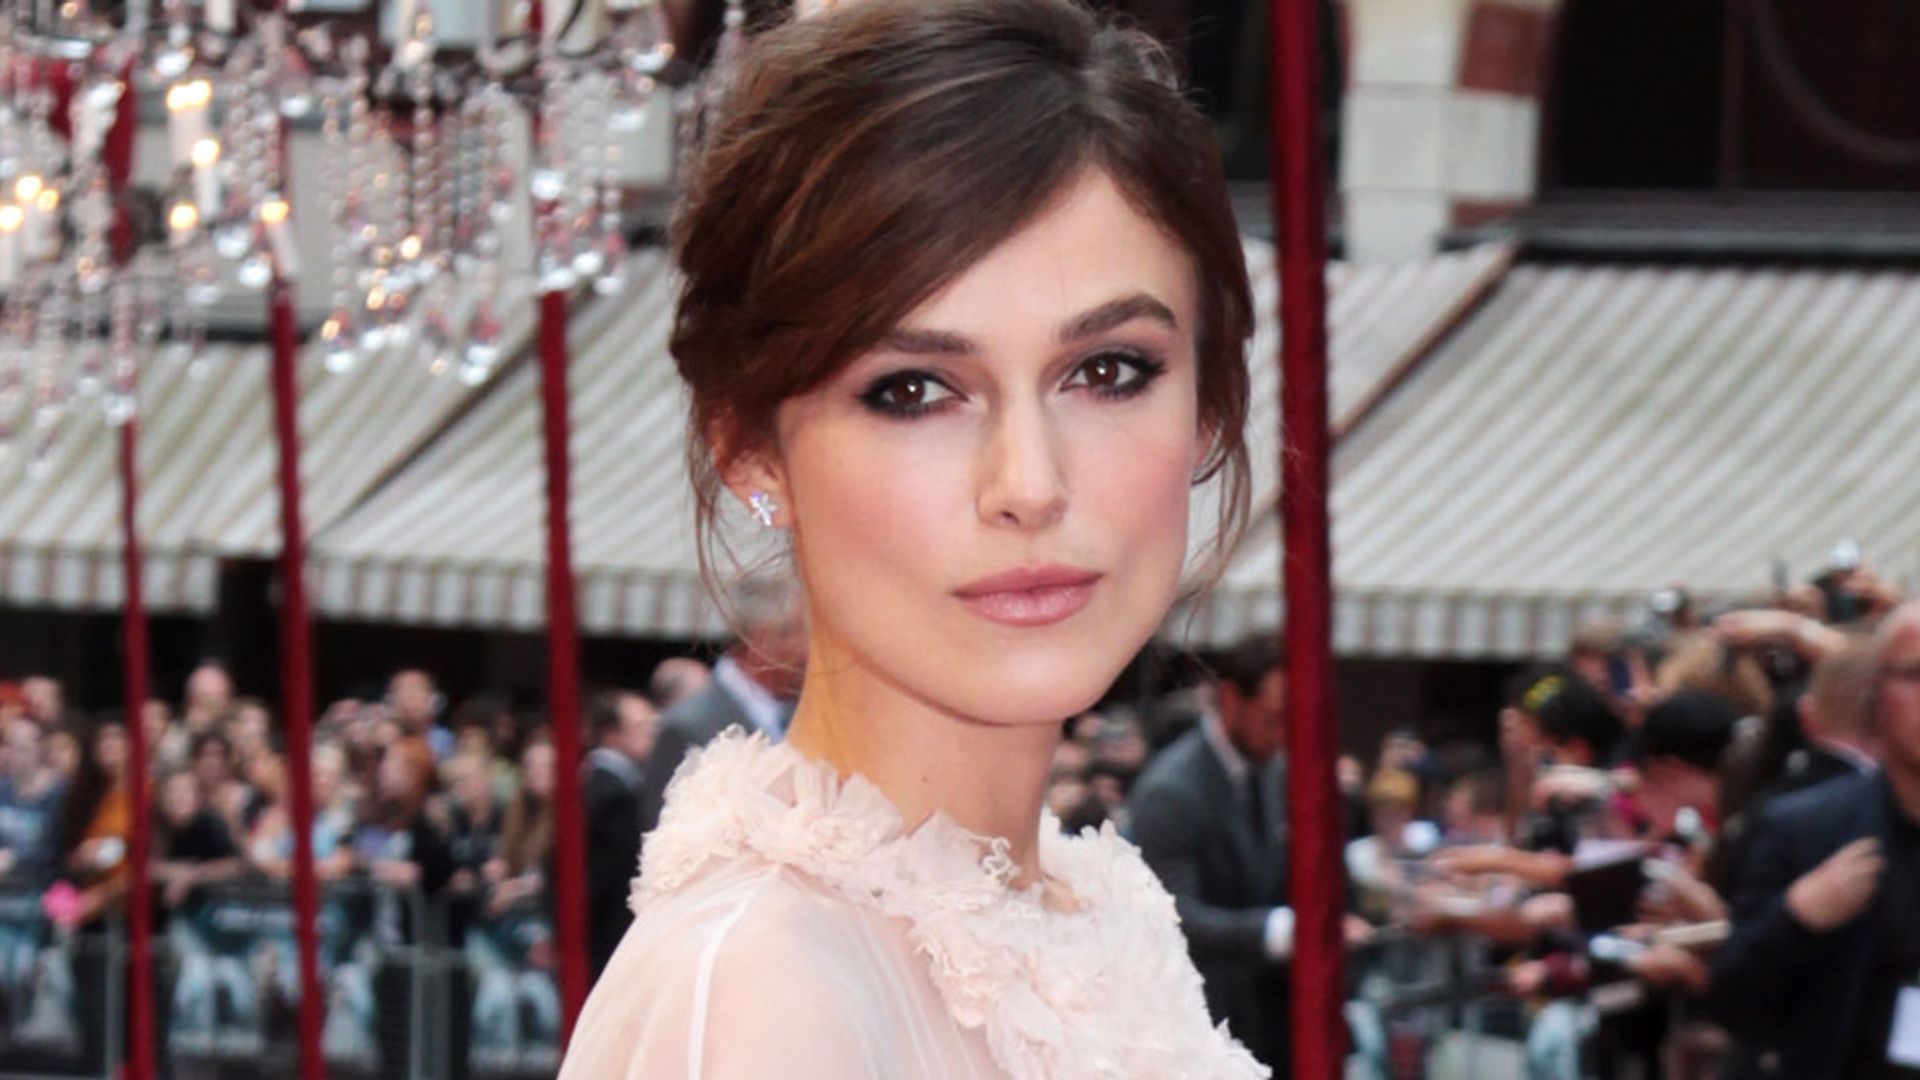 Keira Knightley in a white dress and silver belt on the red carpet